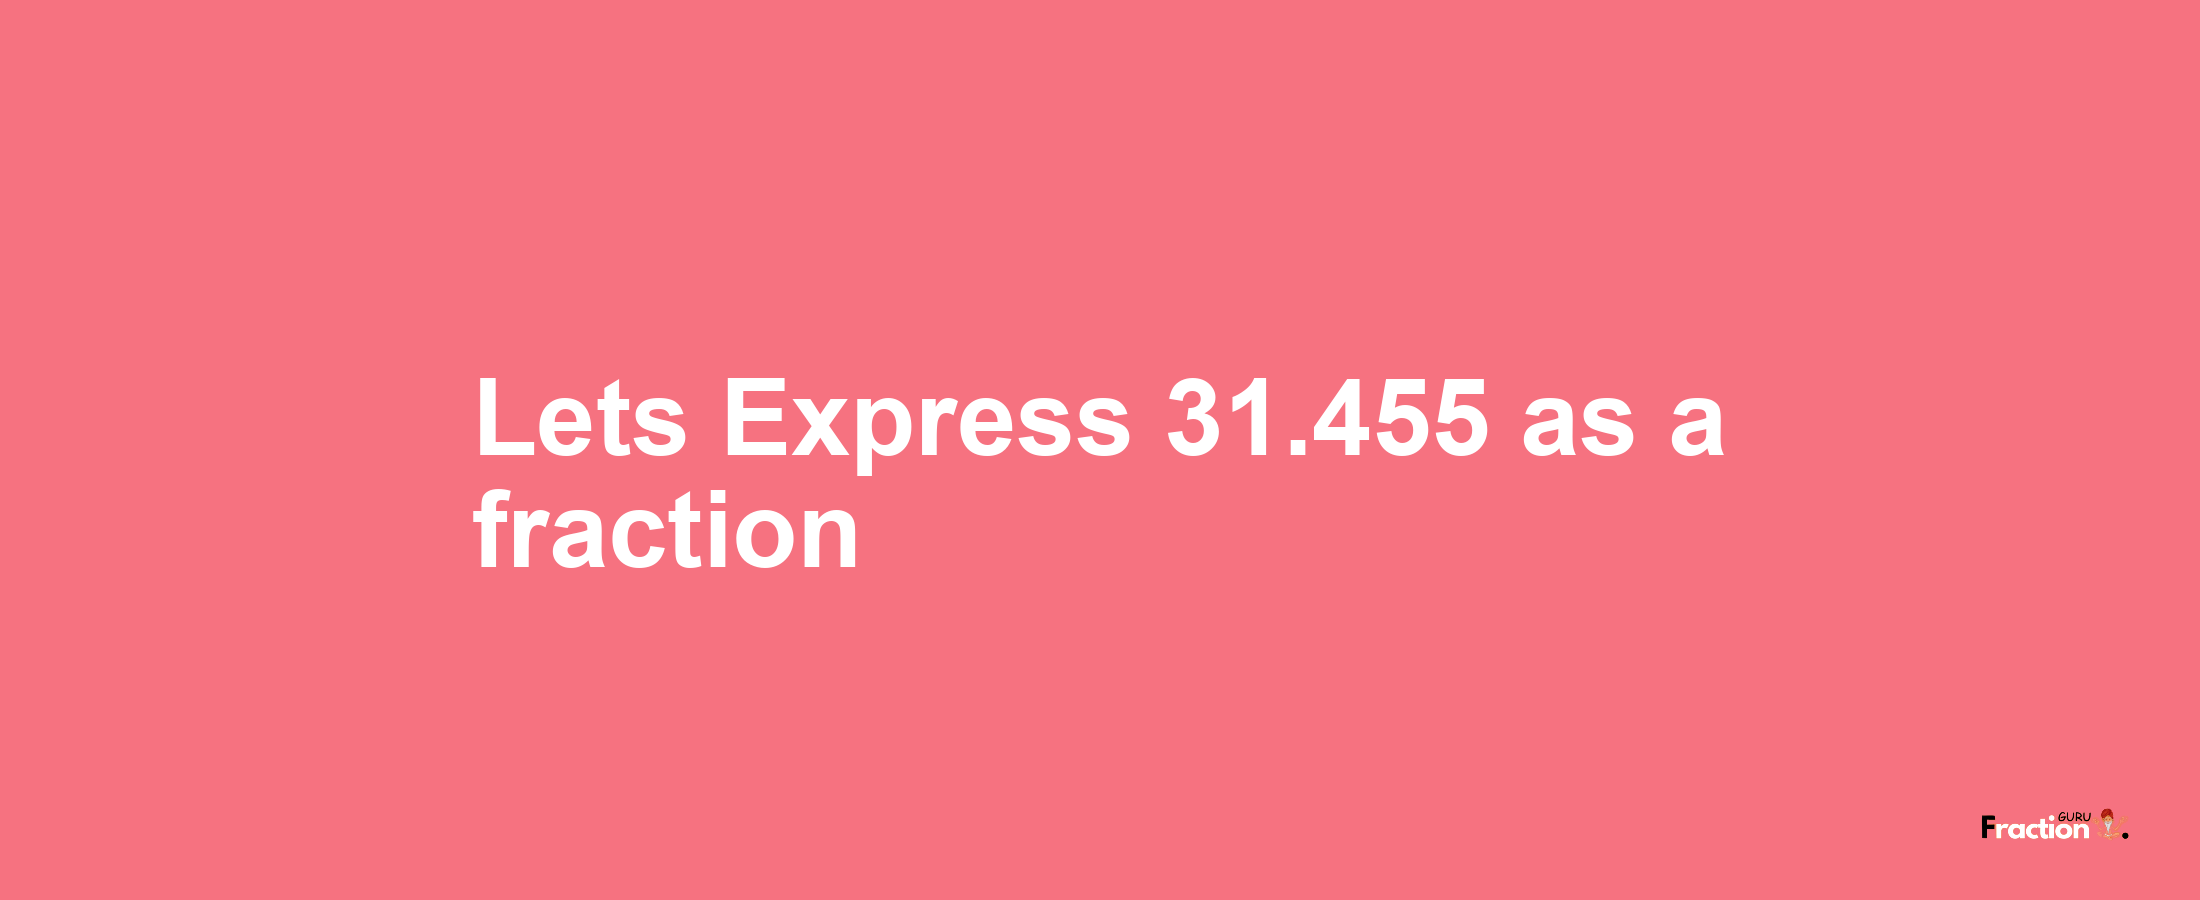 Lets Express 31.455 as afraction